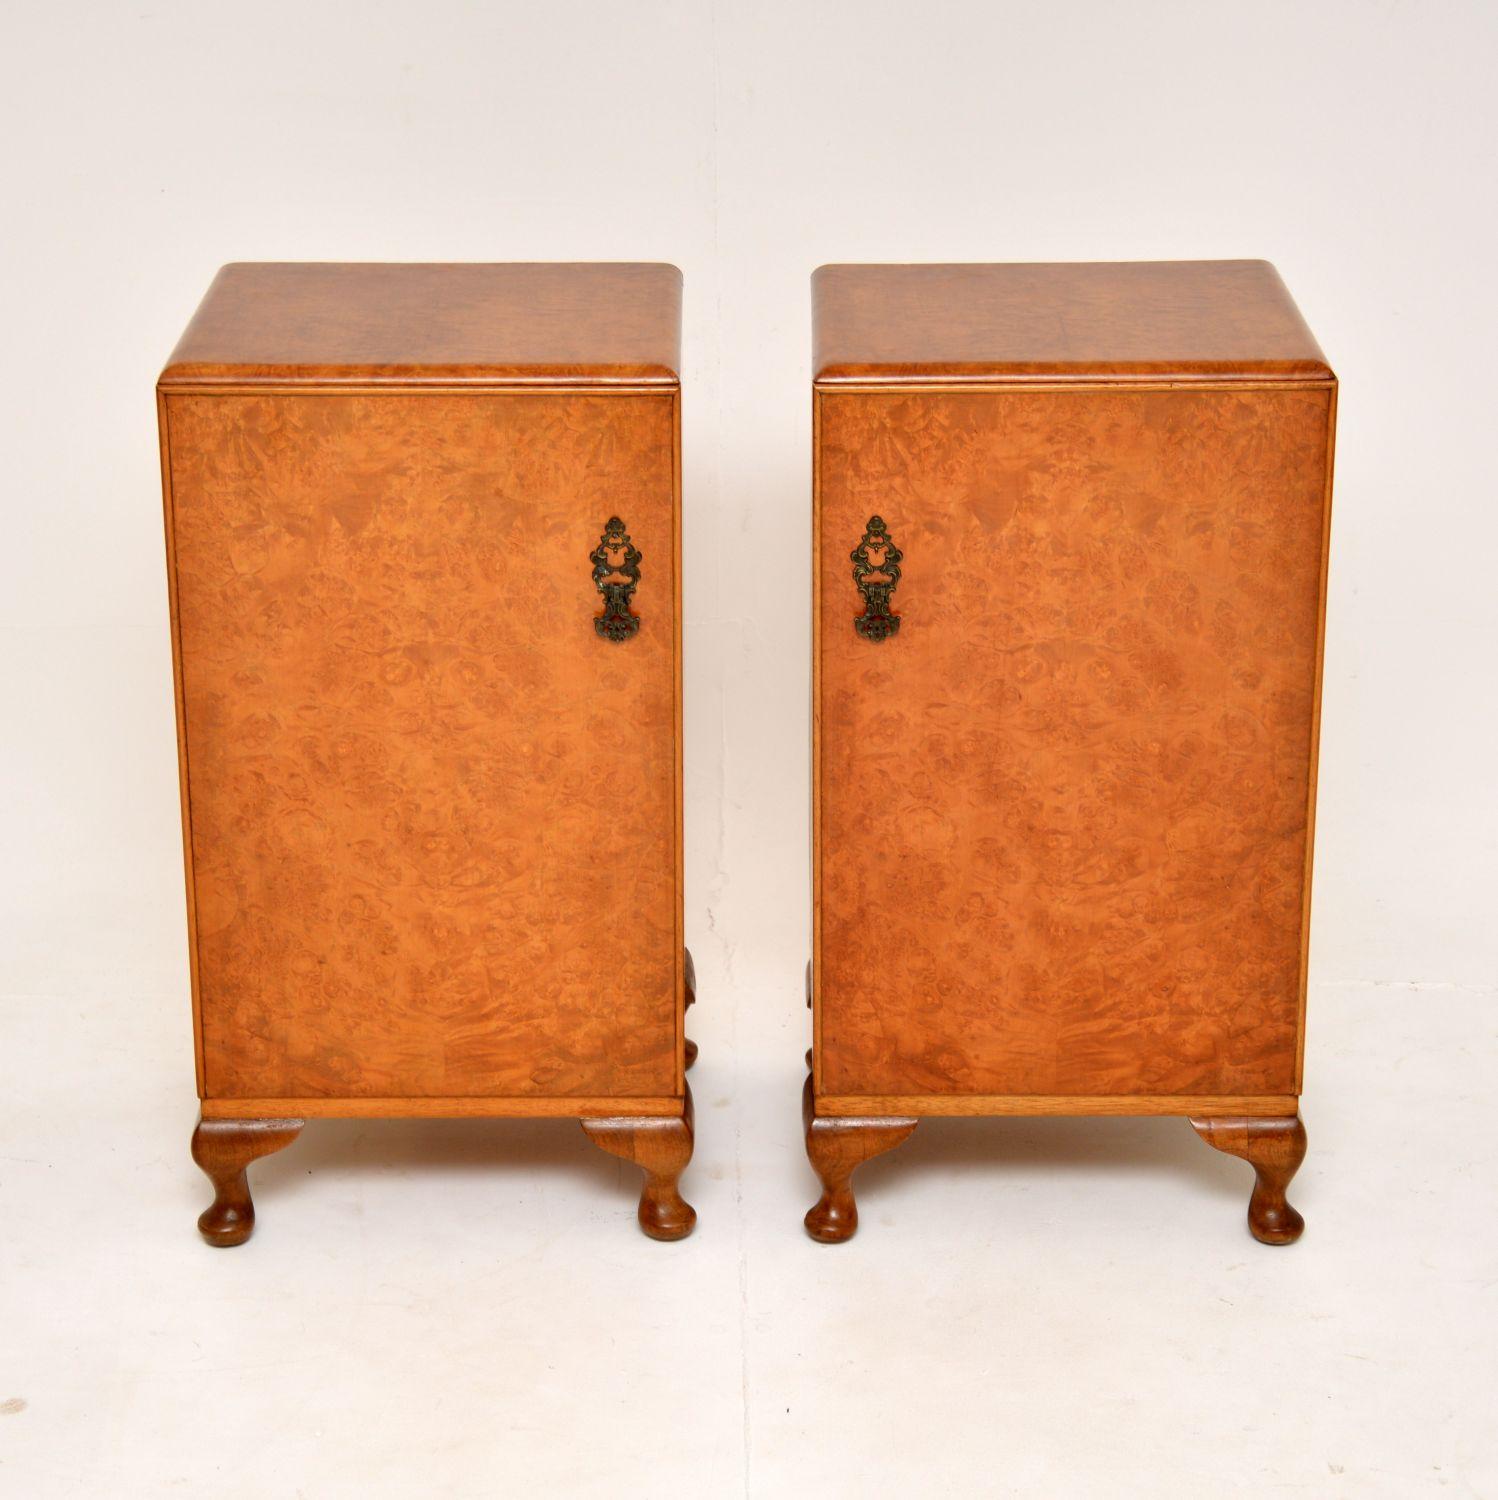 A stunning pair of antique bedside cabinets in burr walnut. They were made in England, and date from the 1930’s.

They are beautifully made and are a very useful size. The door fronts and tops have gorgeous burr walnut grain patterns, they sit on